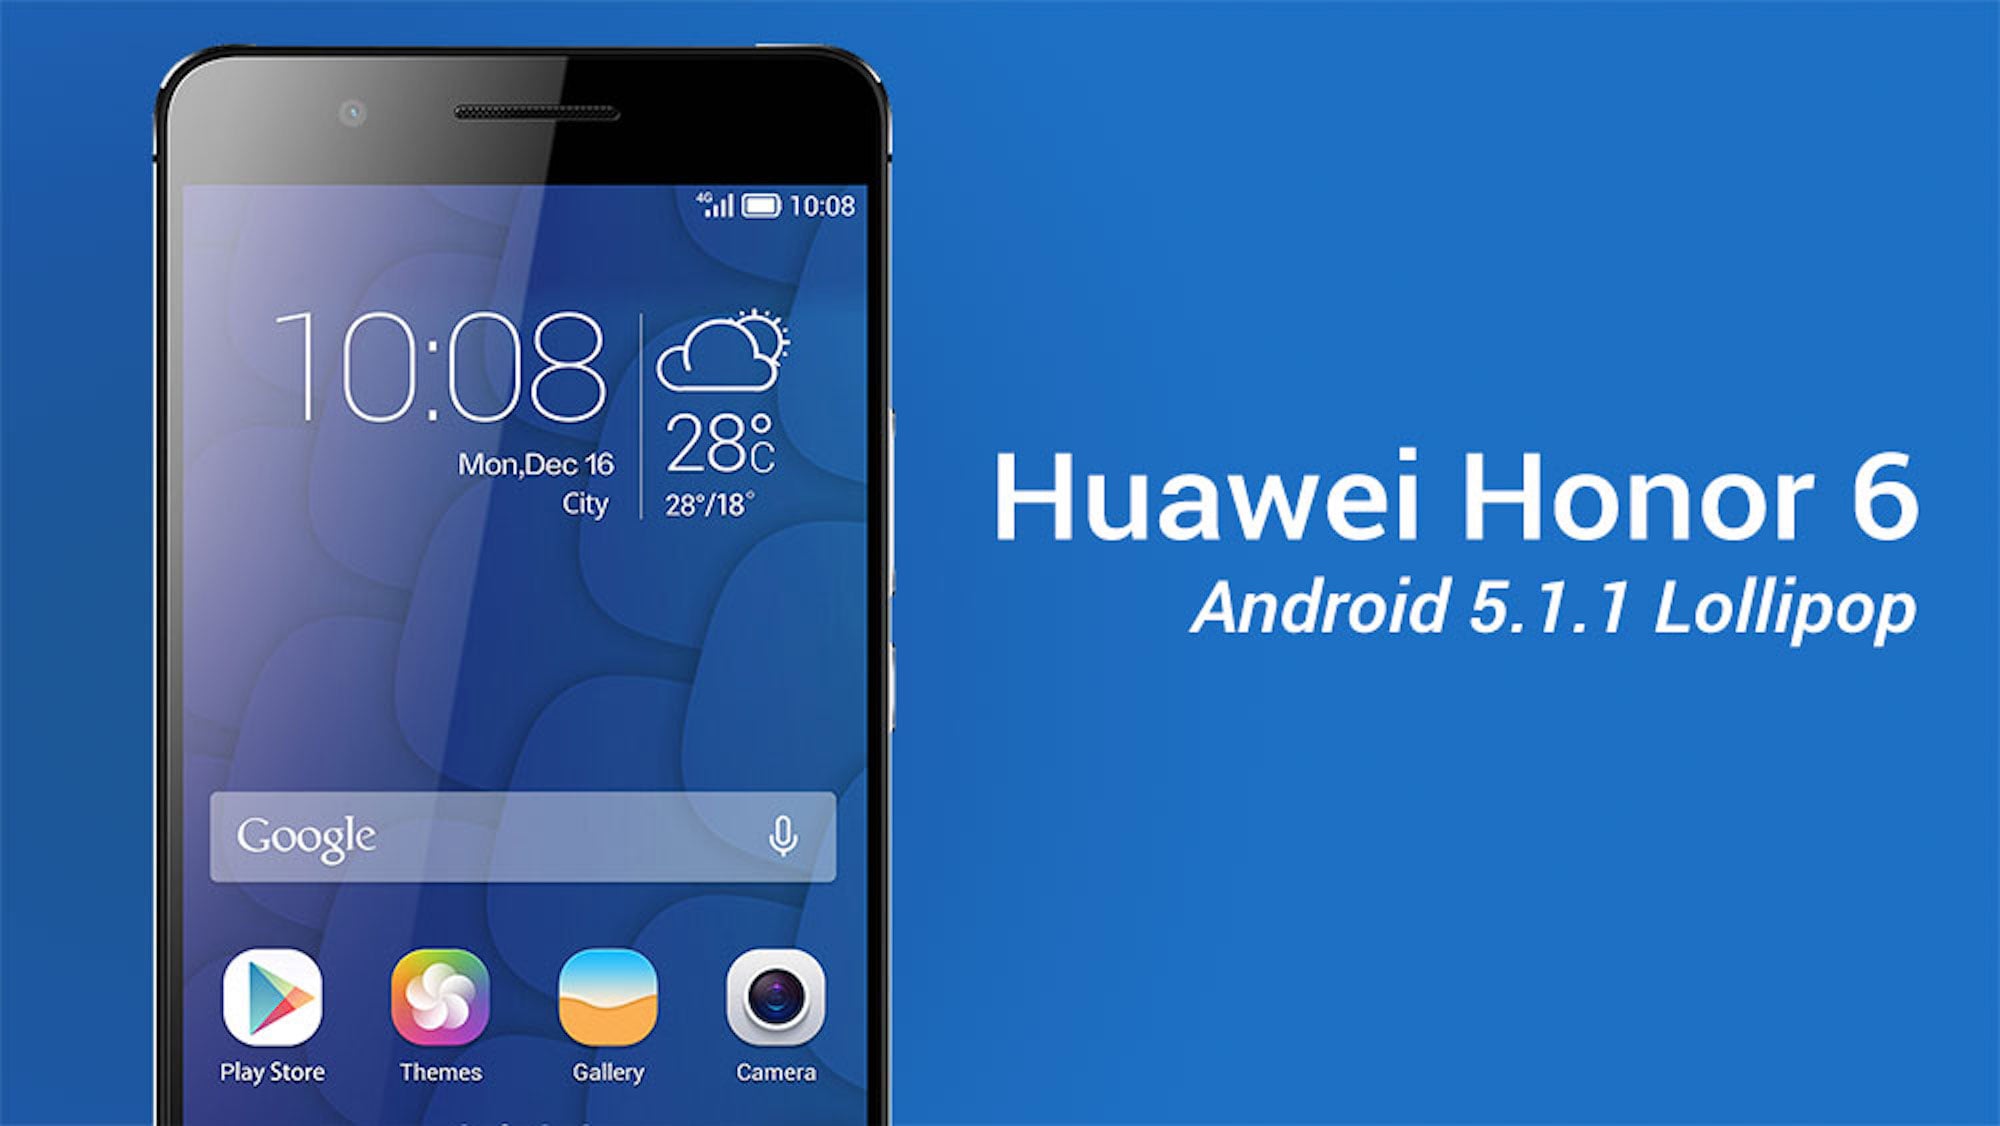 How To Update Huawei 6 H60-L02 To Lollipop 5.1.1